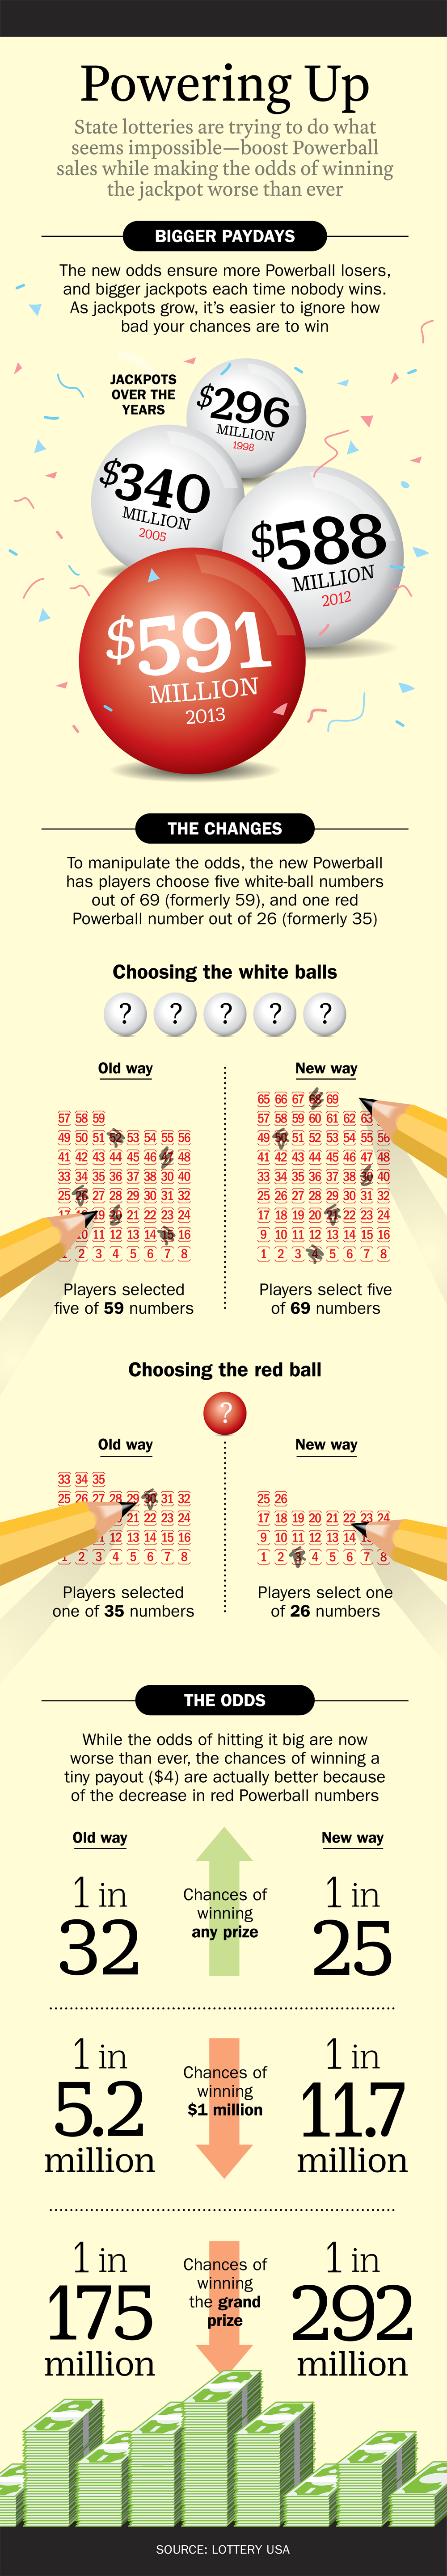 New Powerball rules